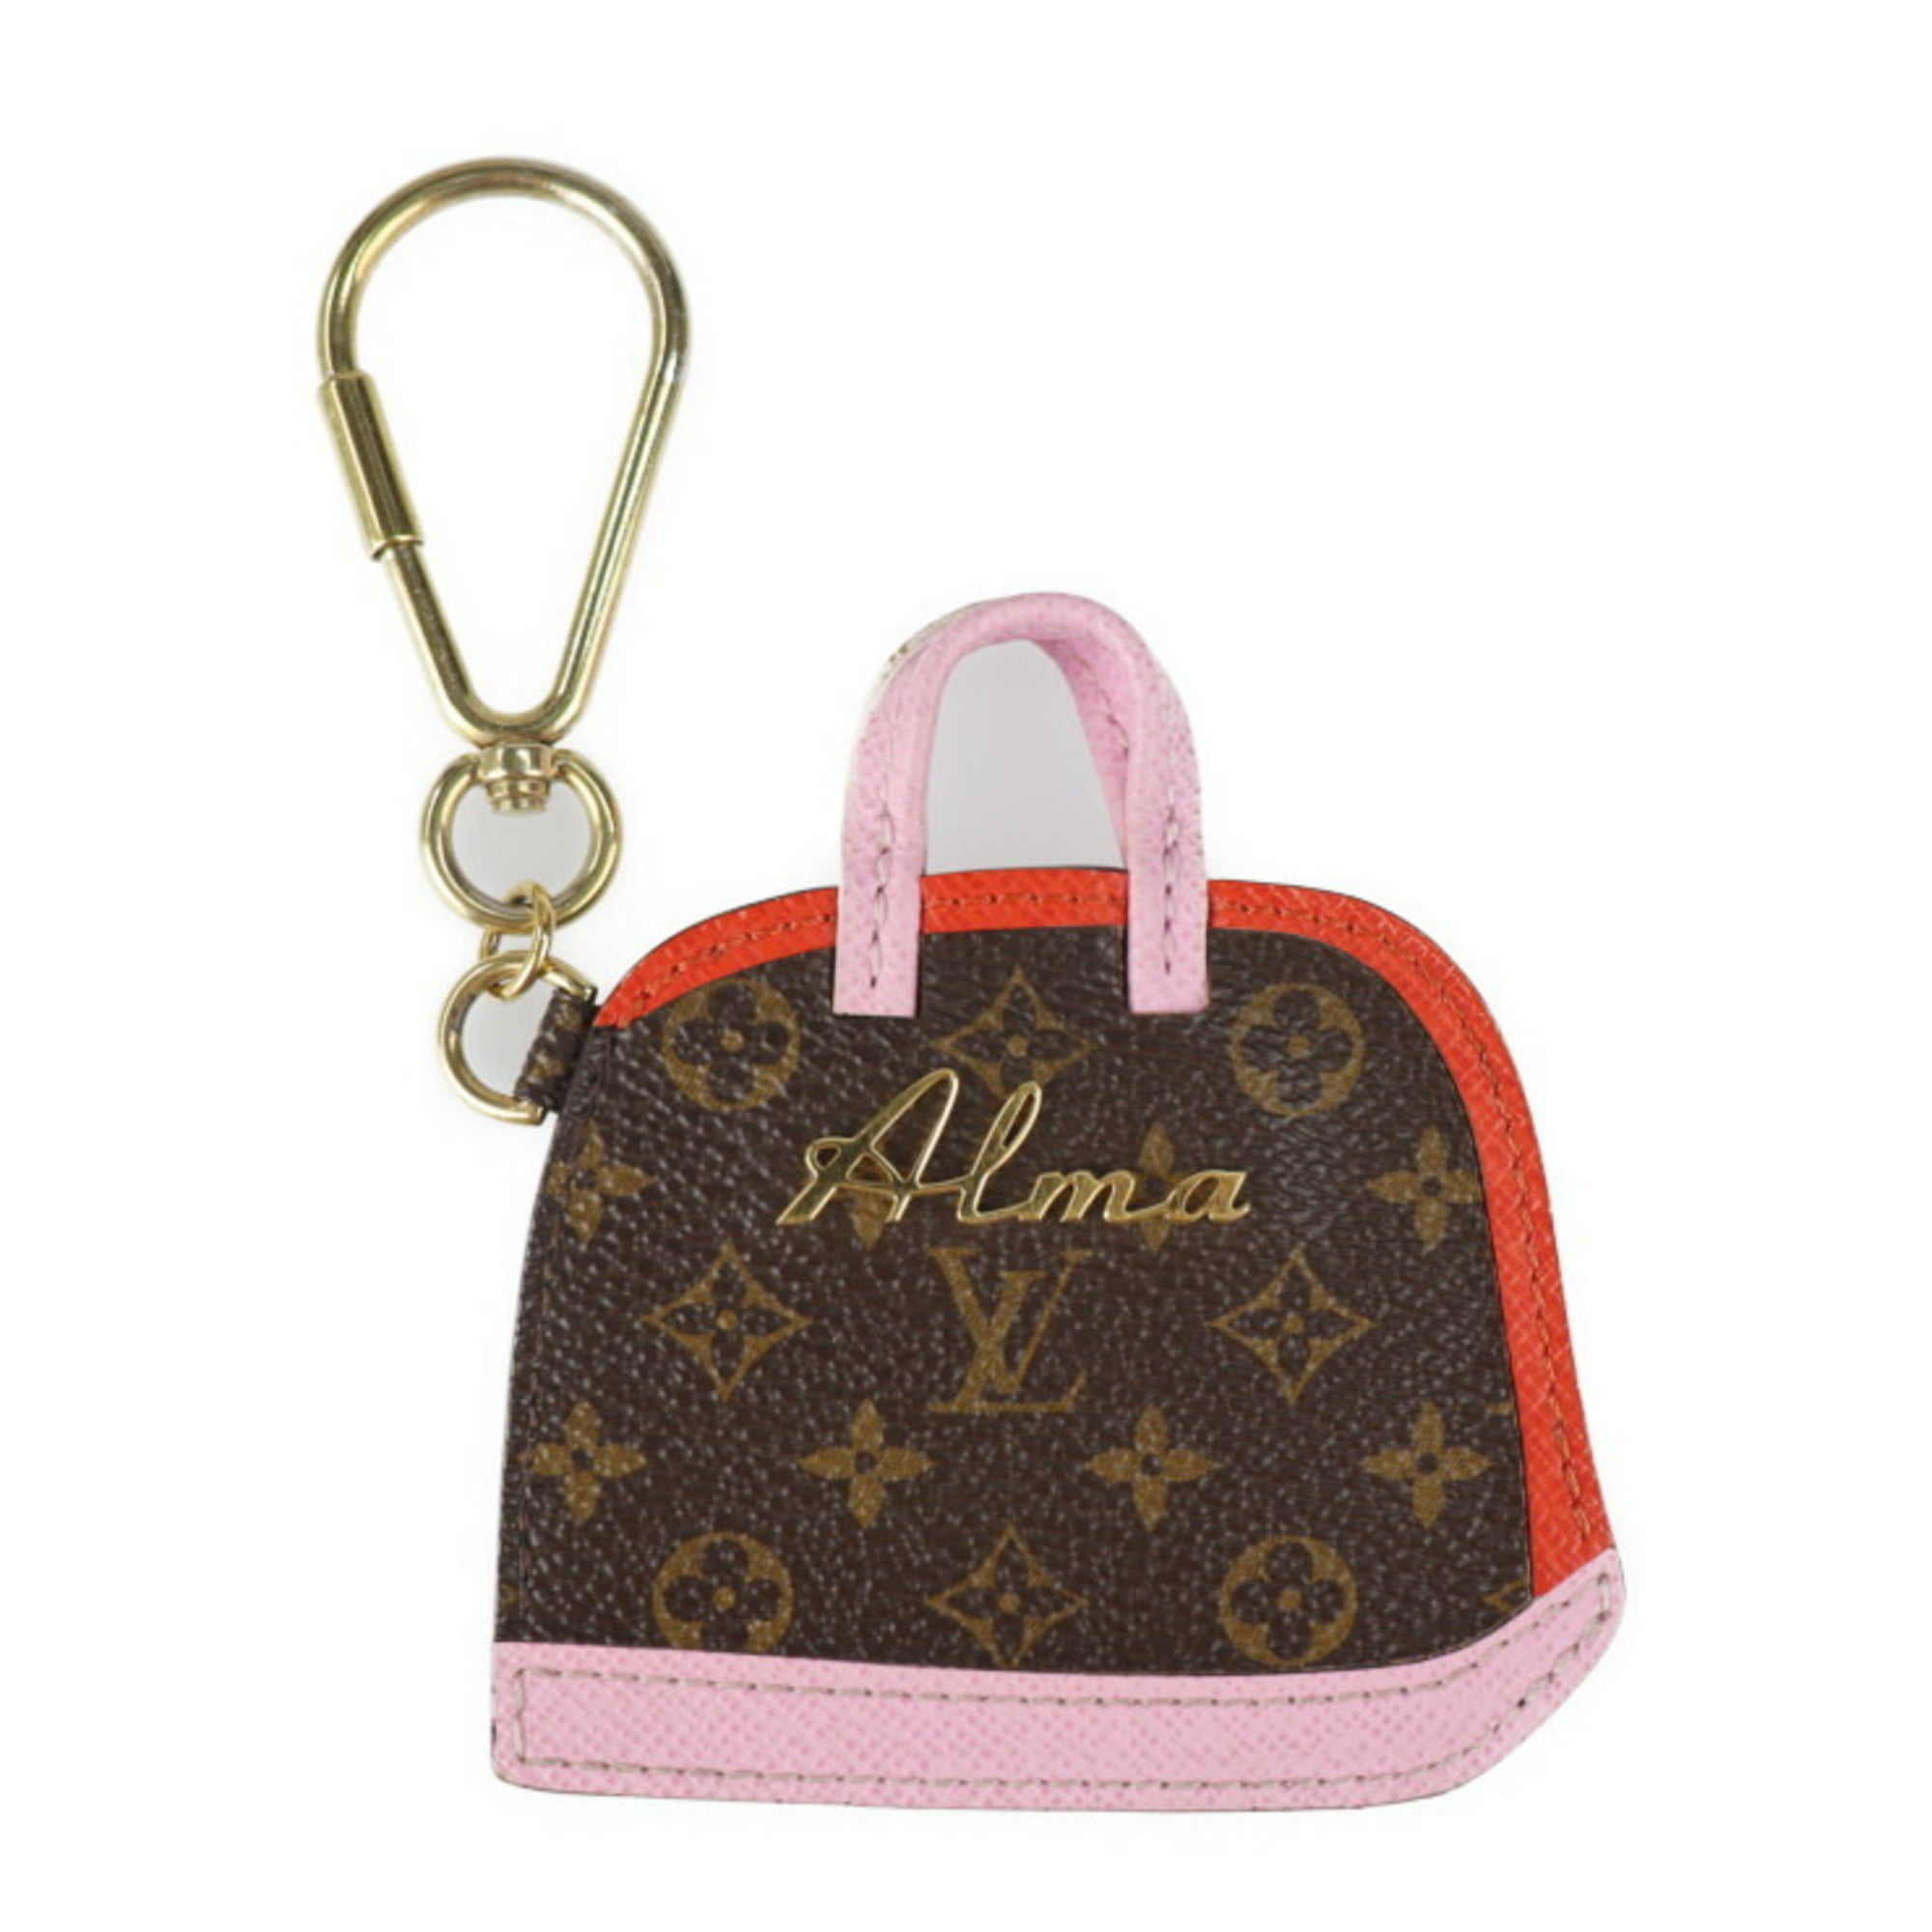 Authenticated Used LOUIS VUITTON Louis Vuitton Pochette Cle BB Alma Keychain  M66181 Monogram Canvas Leather Brown Pink Red Gold Hardware Bag Charm 